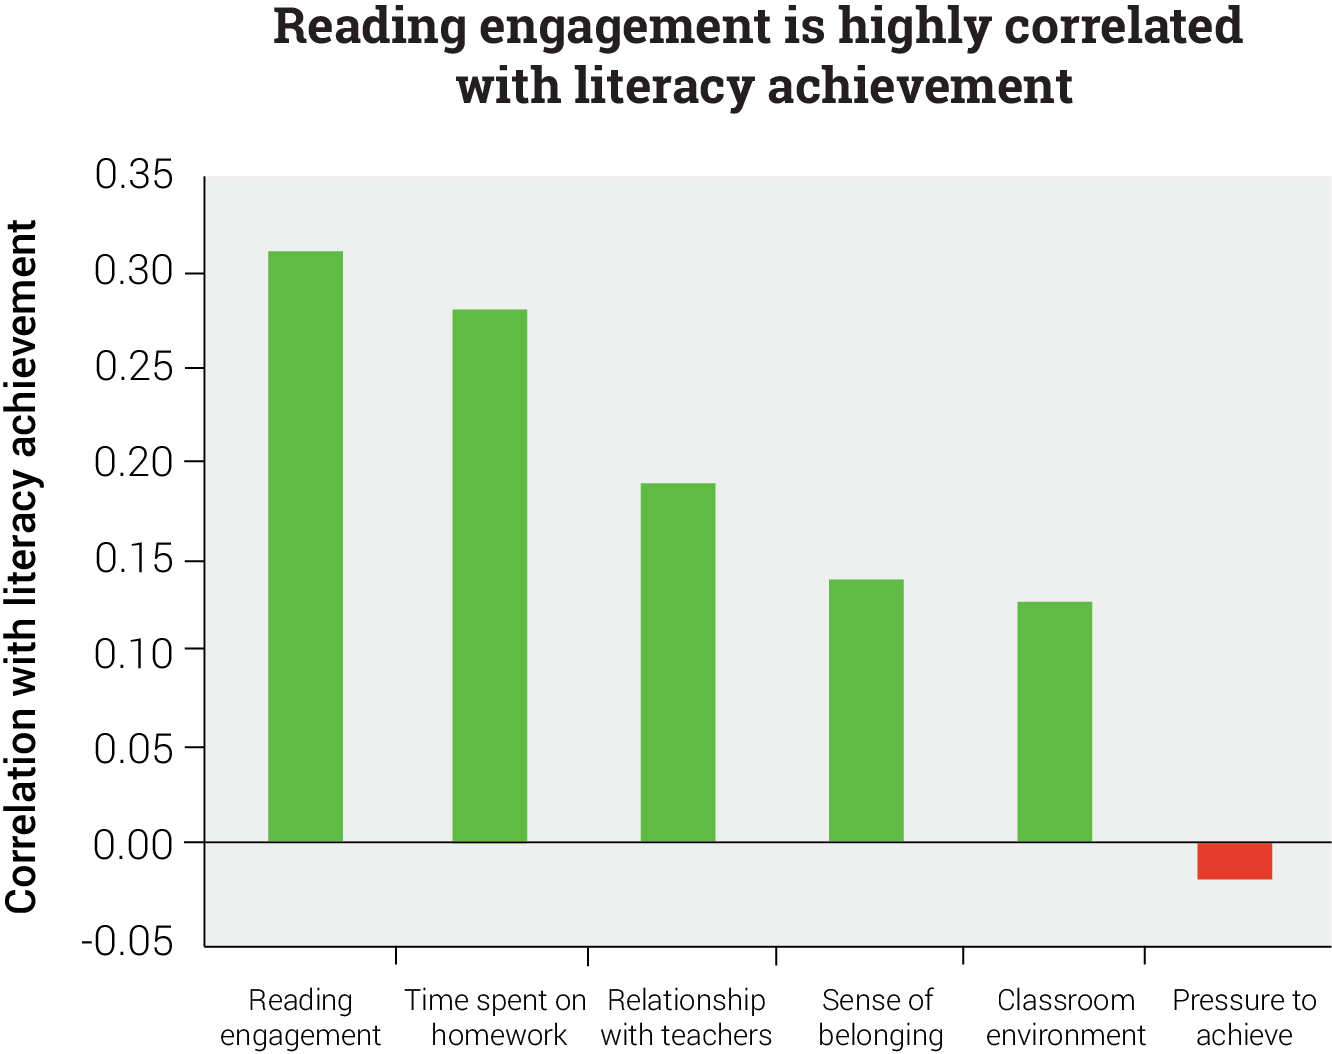 Correlation of Reading Engagement and Literacy Achievement